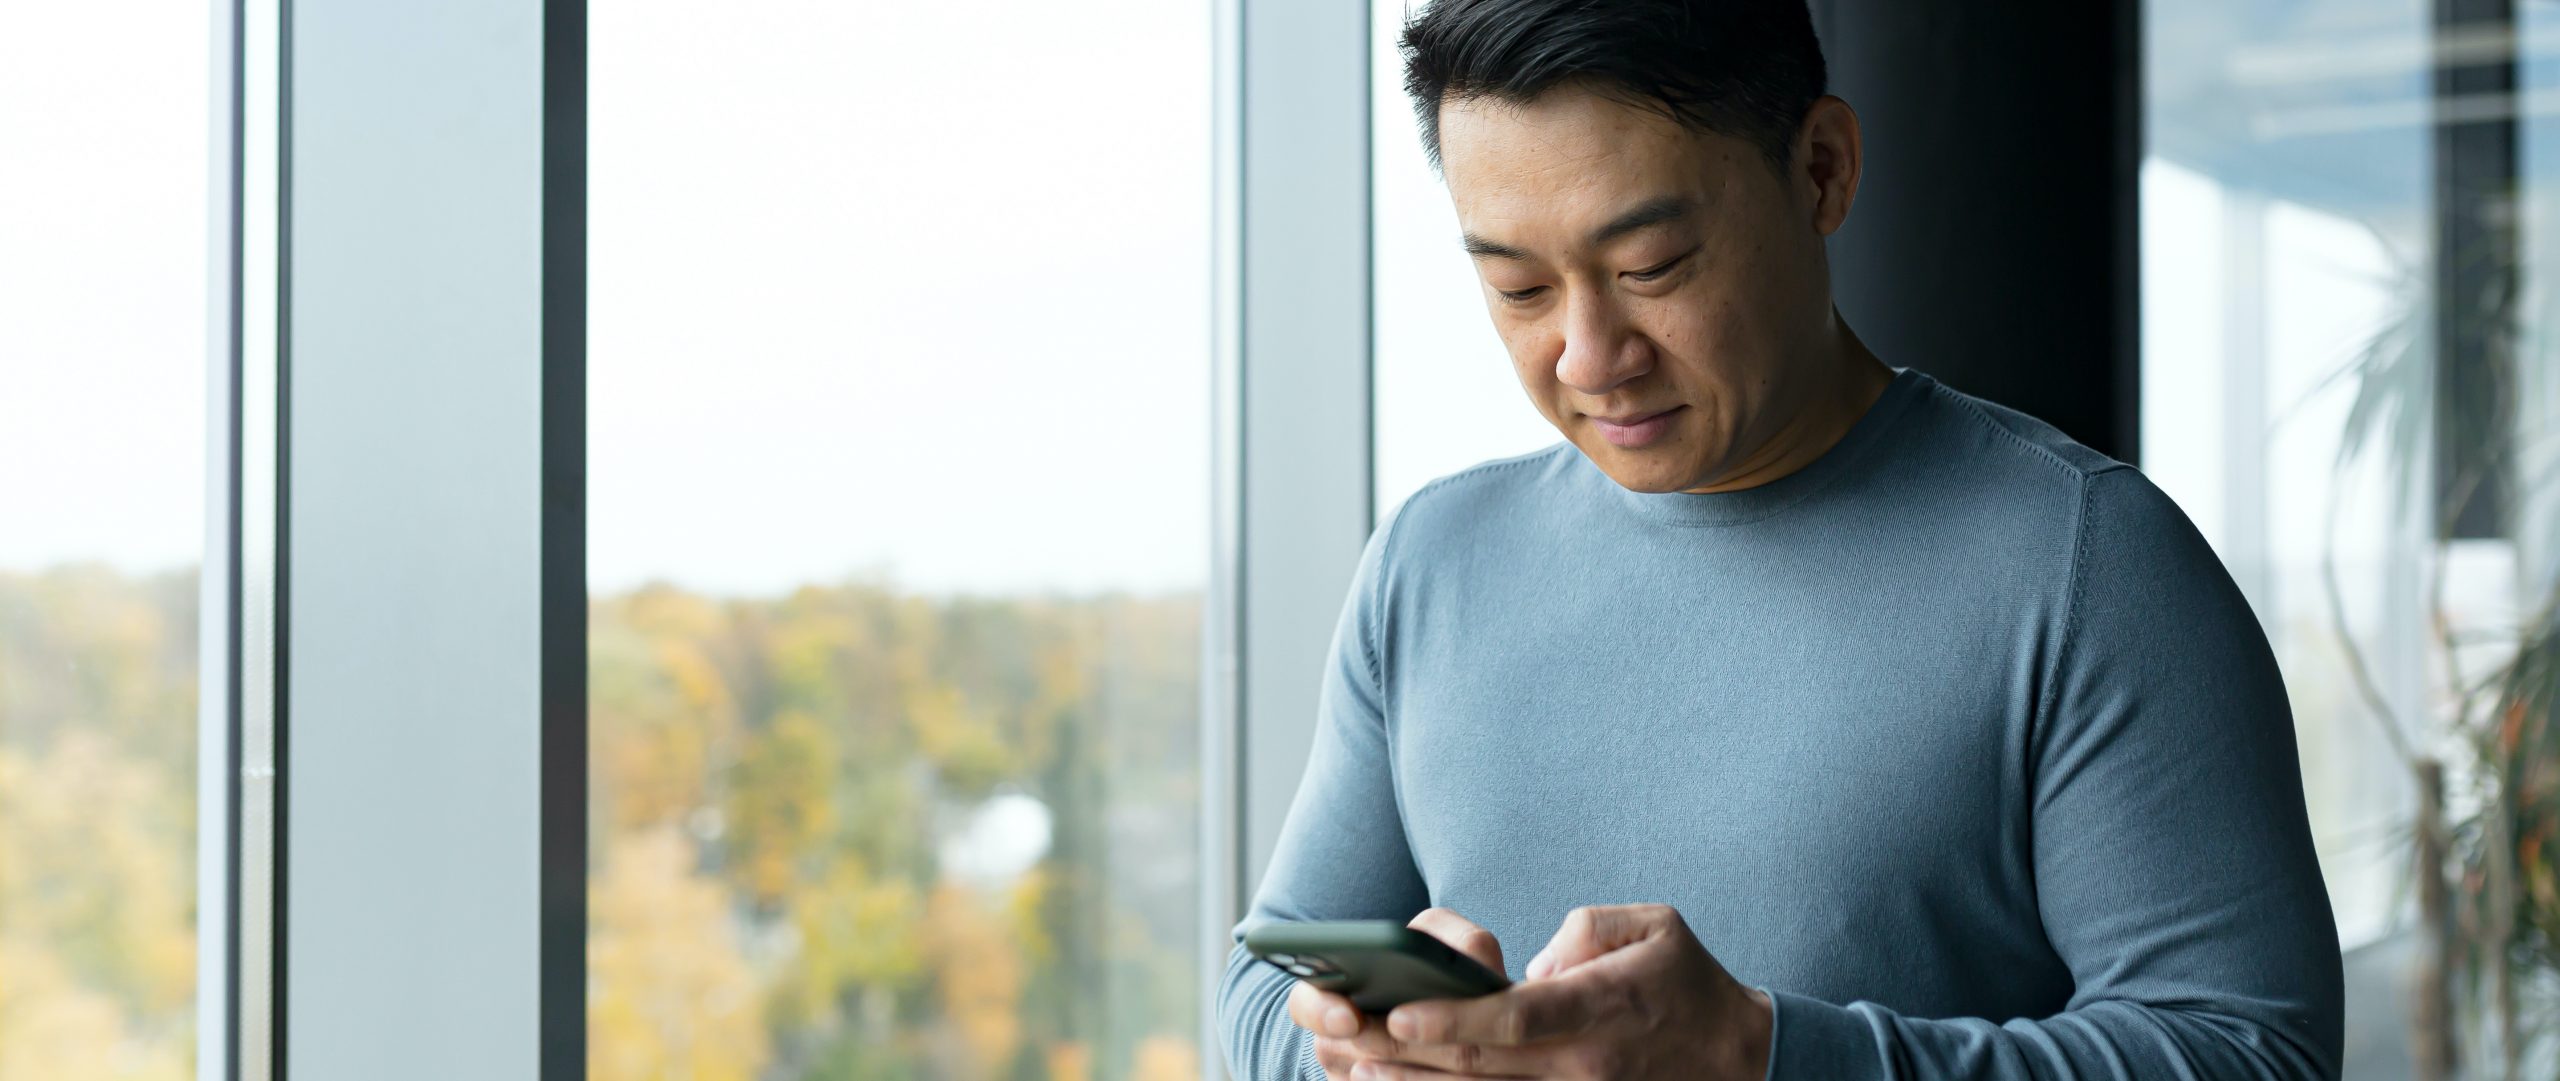 asian business man scrolling on phone